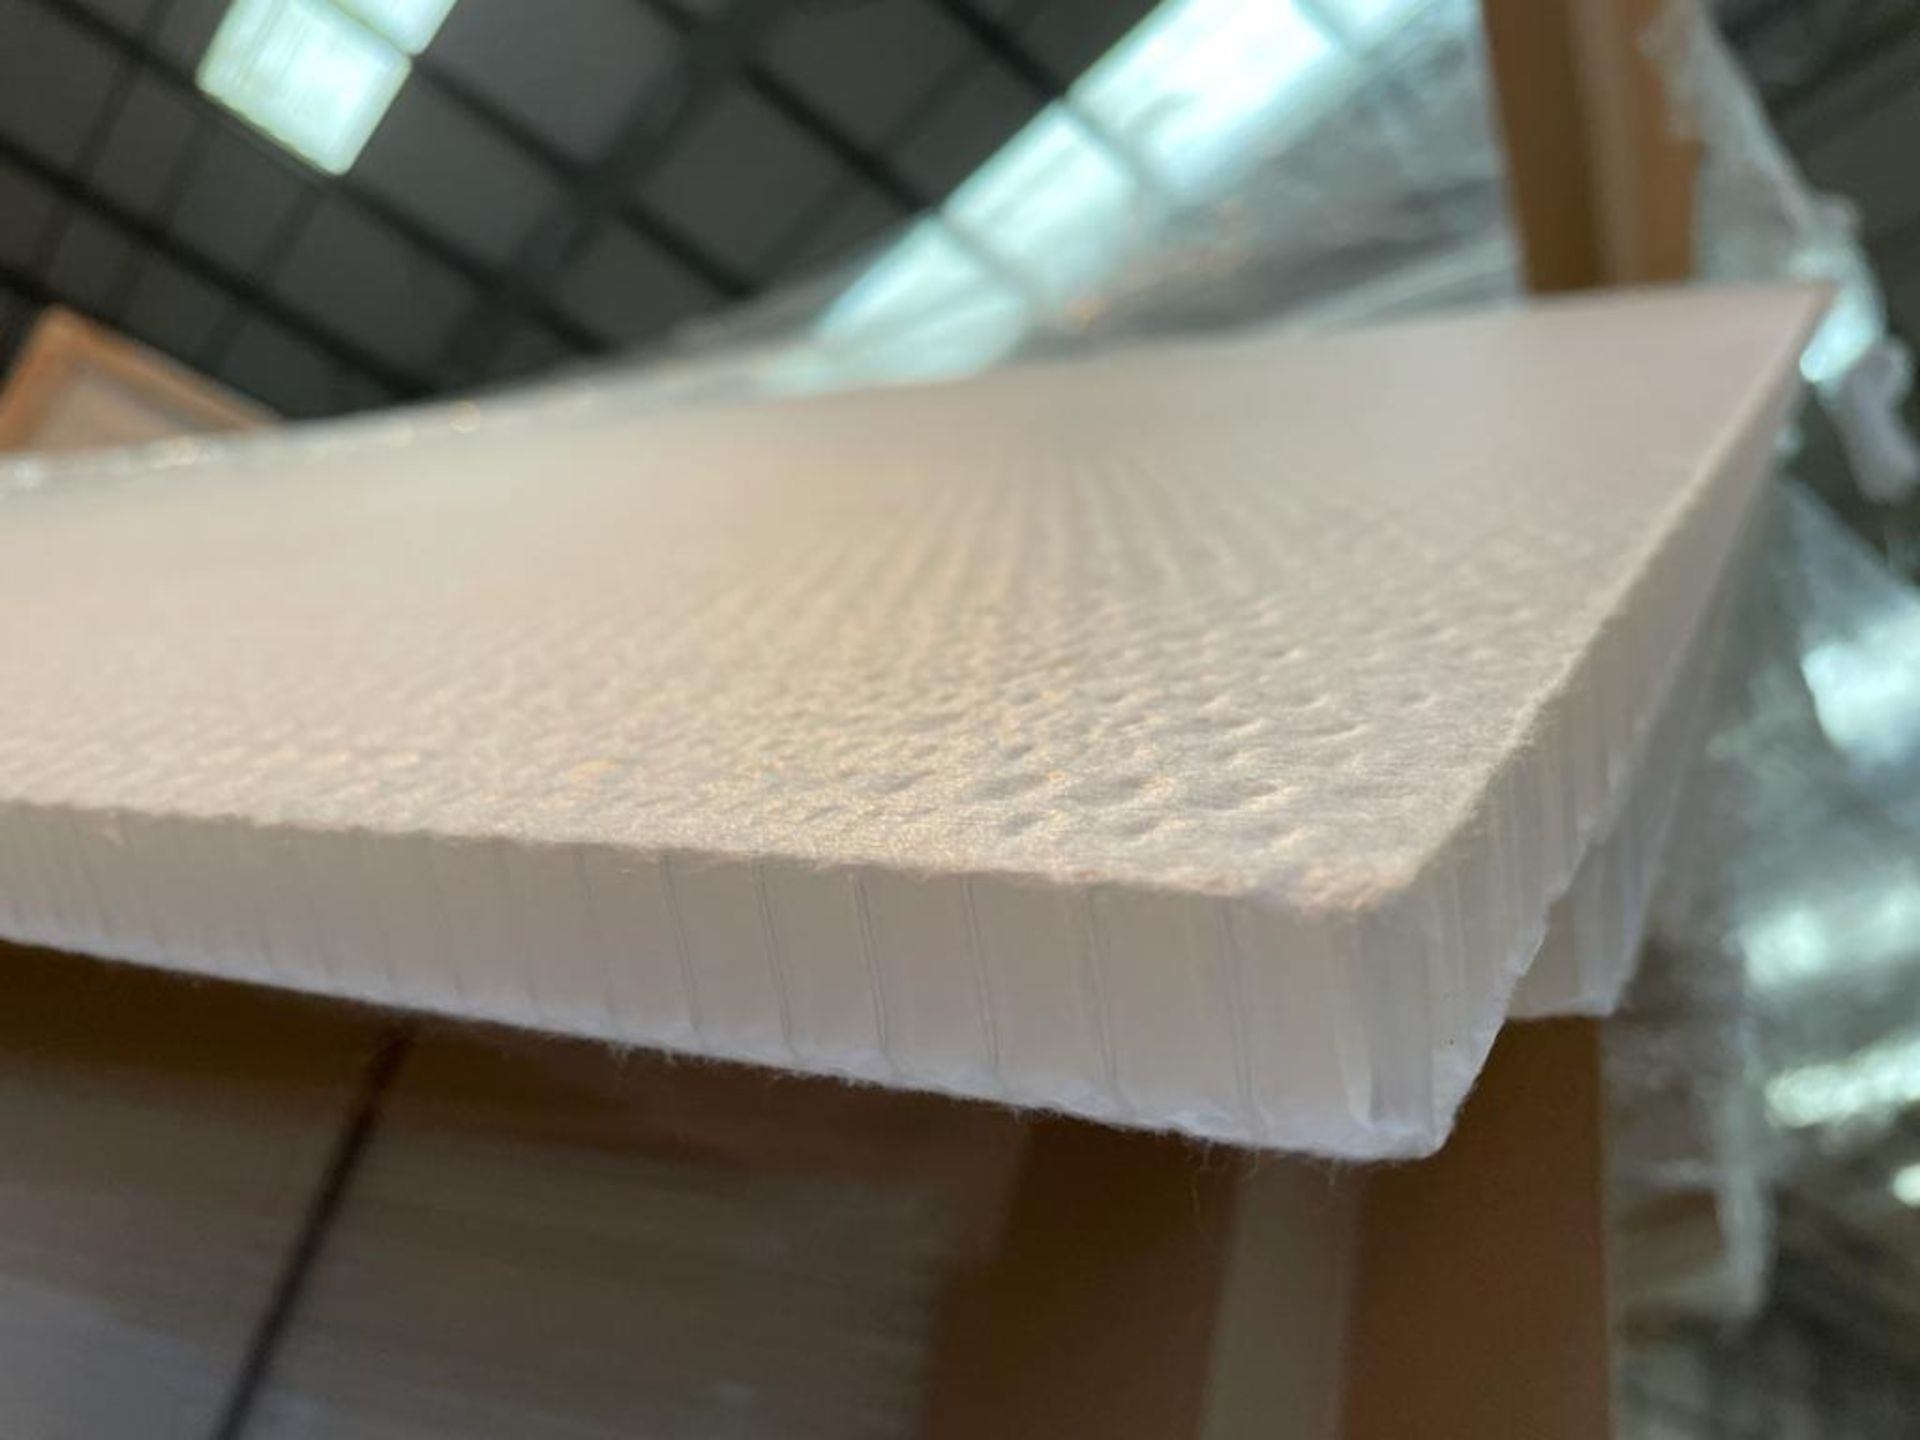 100 x ThermHex Thermoplastic Honeycomb Core Panels - Size: 3558 x 1215 x 20mm - New Stock - Lightwei - Image 6 of 7